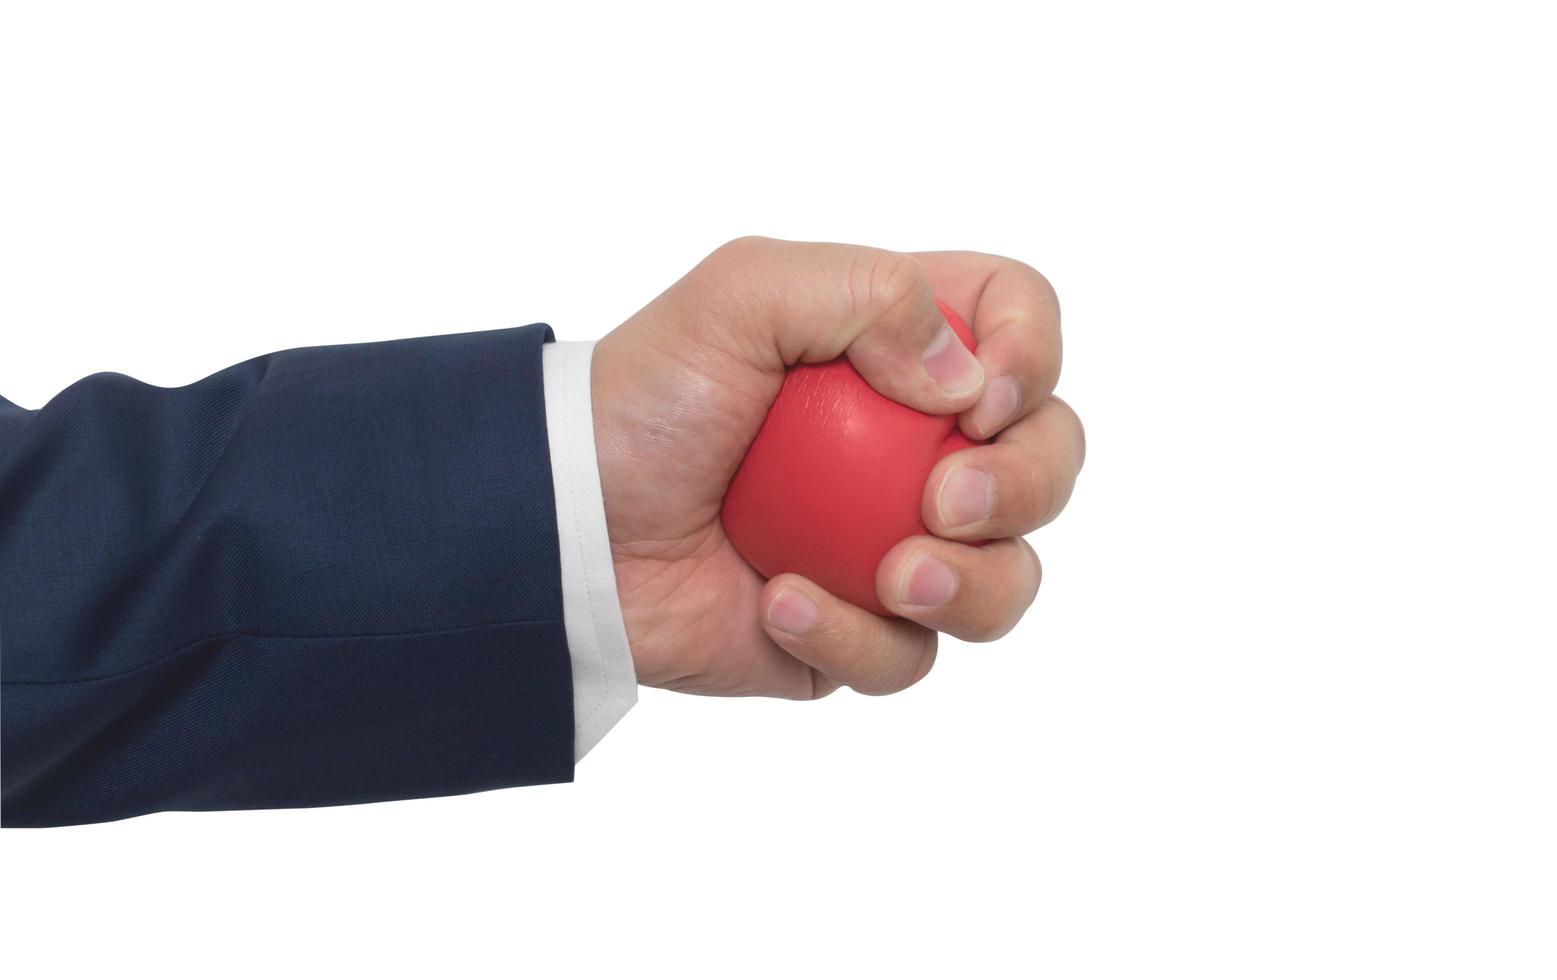 A man hand squeezing a stress ball on white background photo